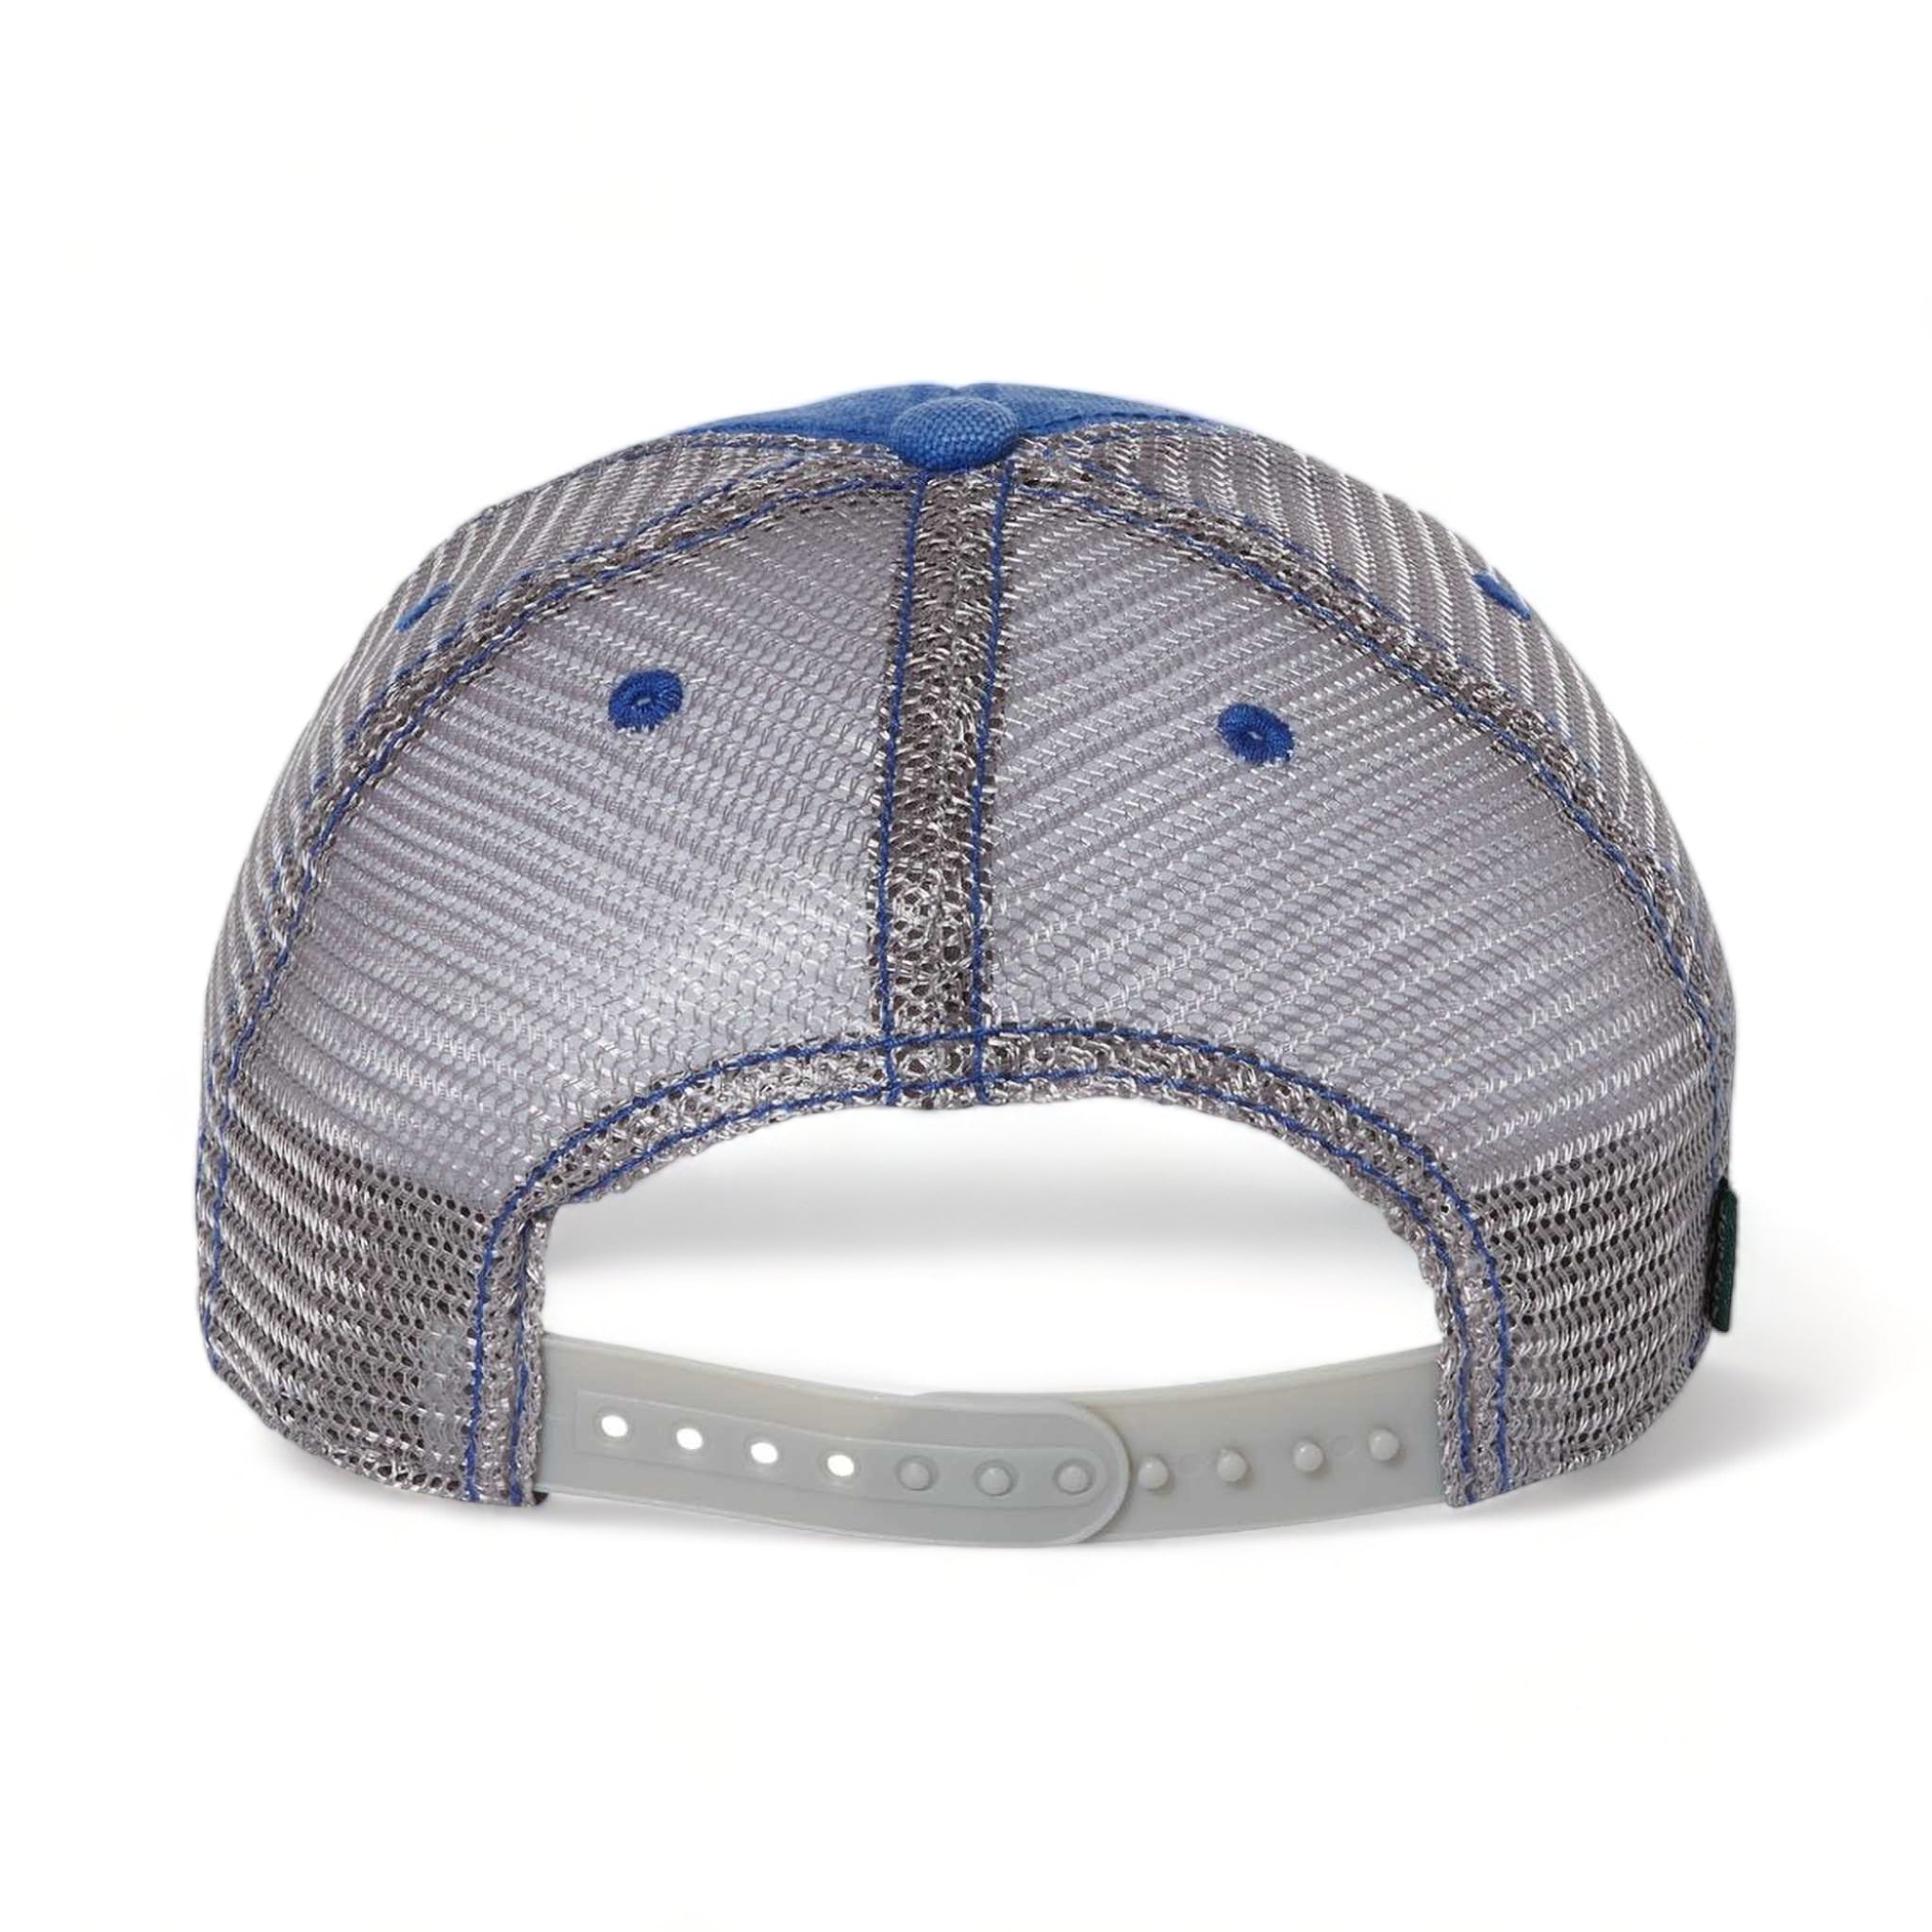 Back view of LEGACY DTA custom hat in royal and grey